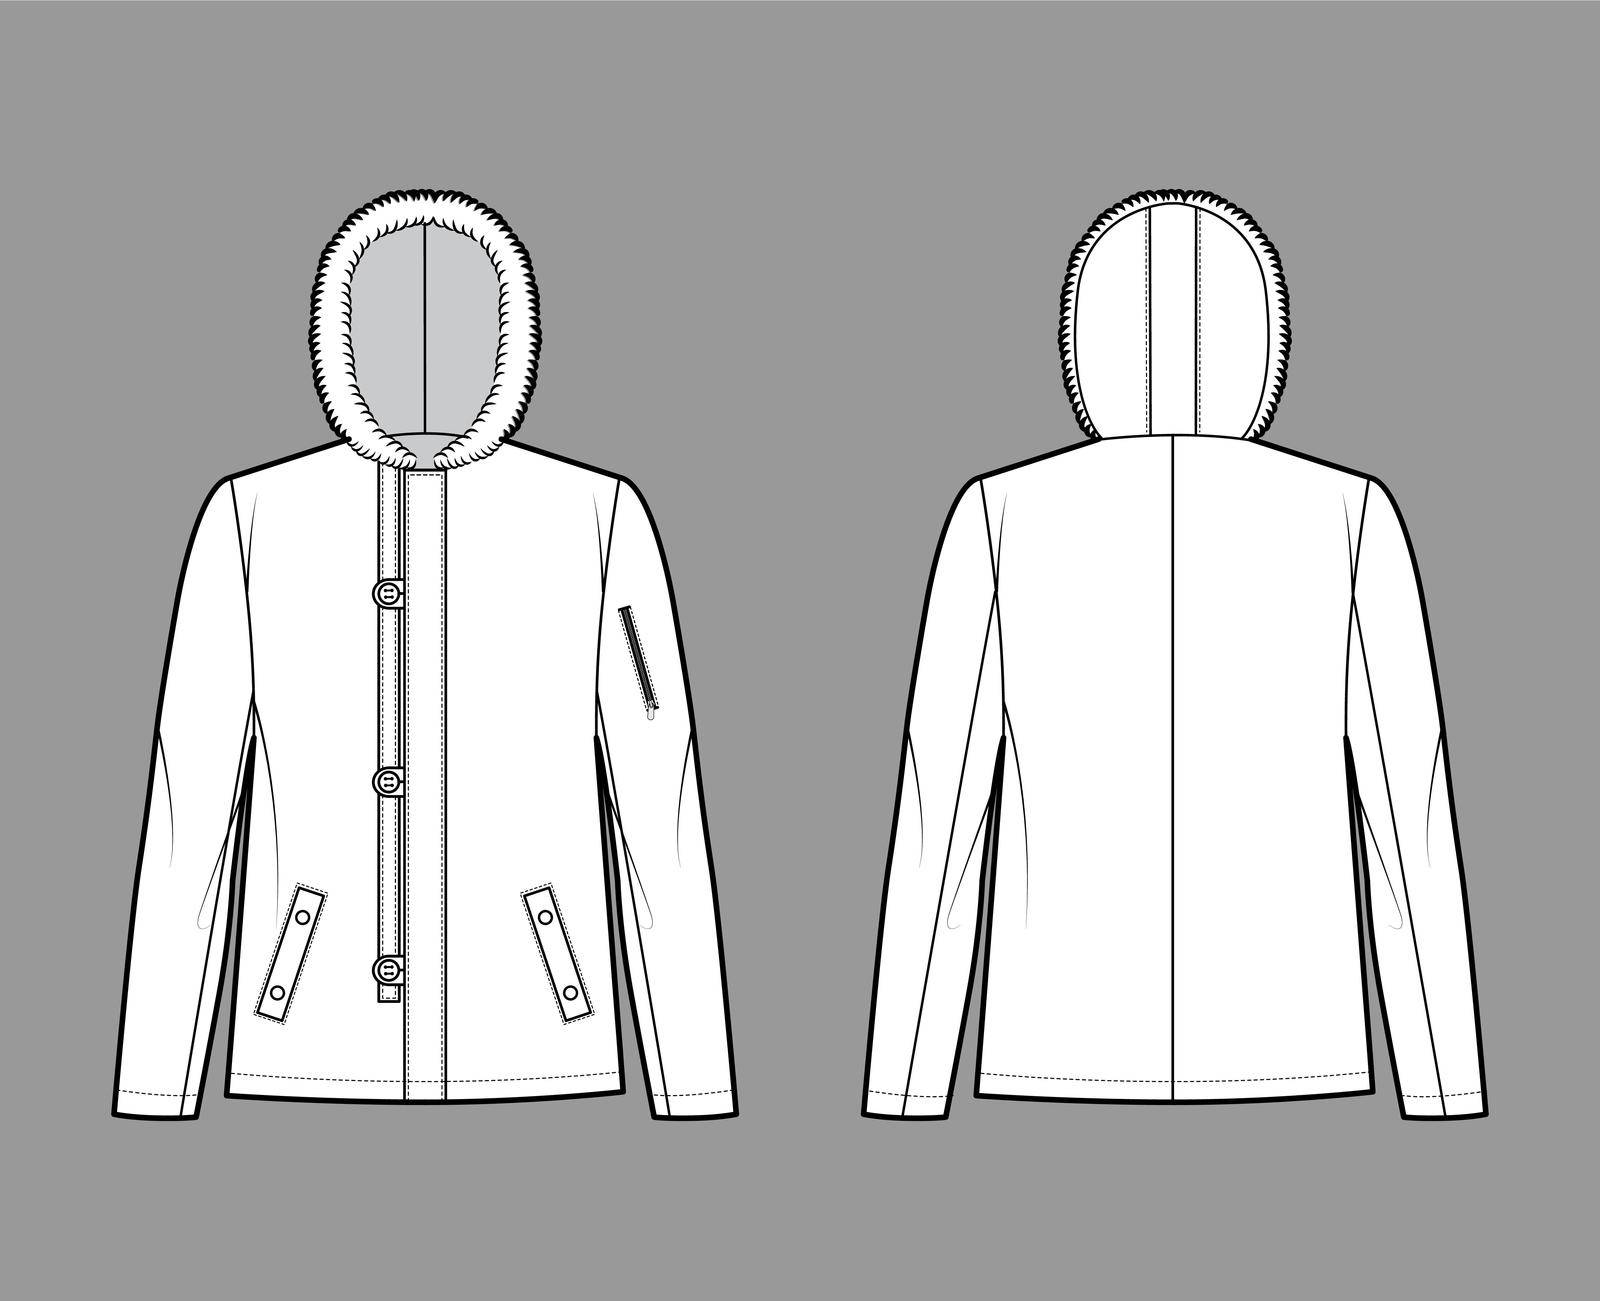 N-2B flight jacket technical fashion illustration with oversized, fur hood, long sleeves, flap pockets, button opening by Vectoressa